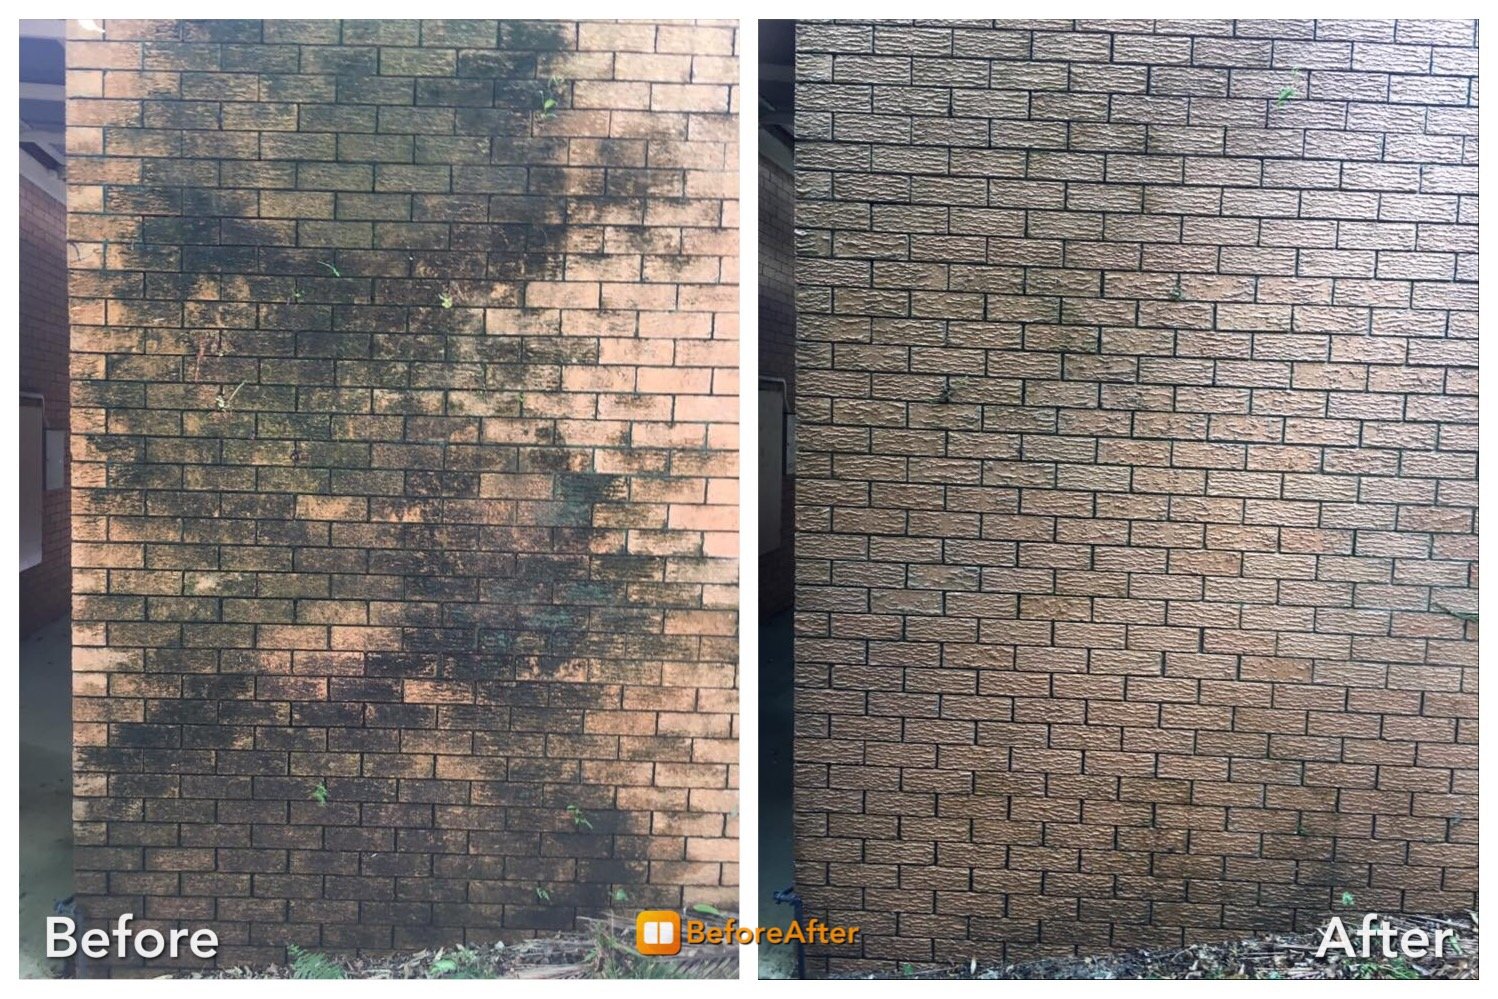 Before and after cleaning a brick wall